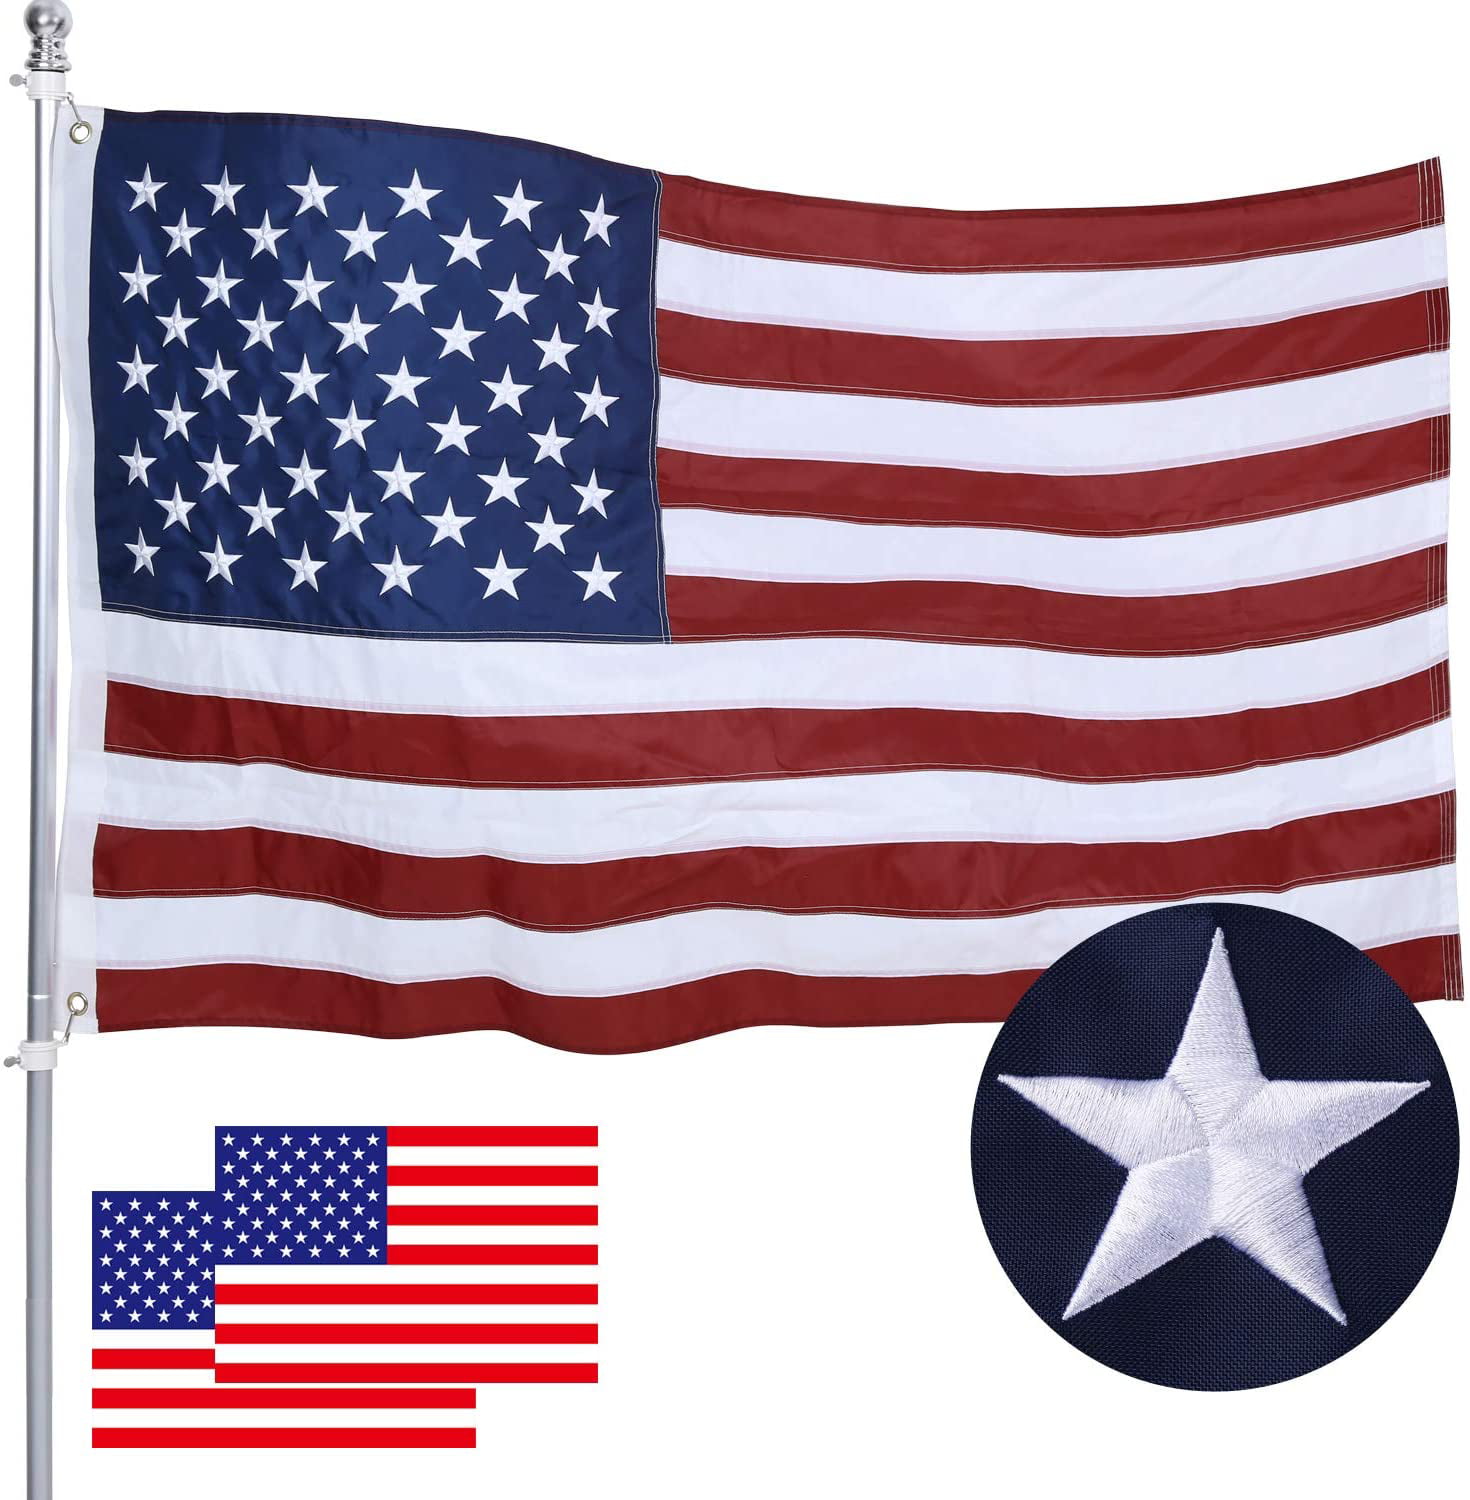 Embroidered Stars Fade Resistant Grace Alley American Flag: 4x6 FT US Flag Heavy Duty 100% Made in USA Sewn Stripes and Brass Grommets Long Lasting Nylon for Outdoor Durability.